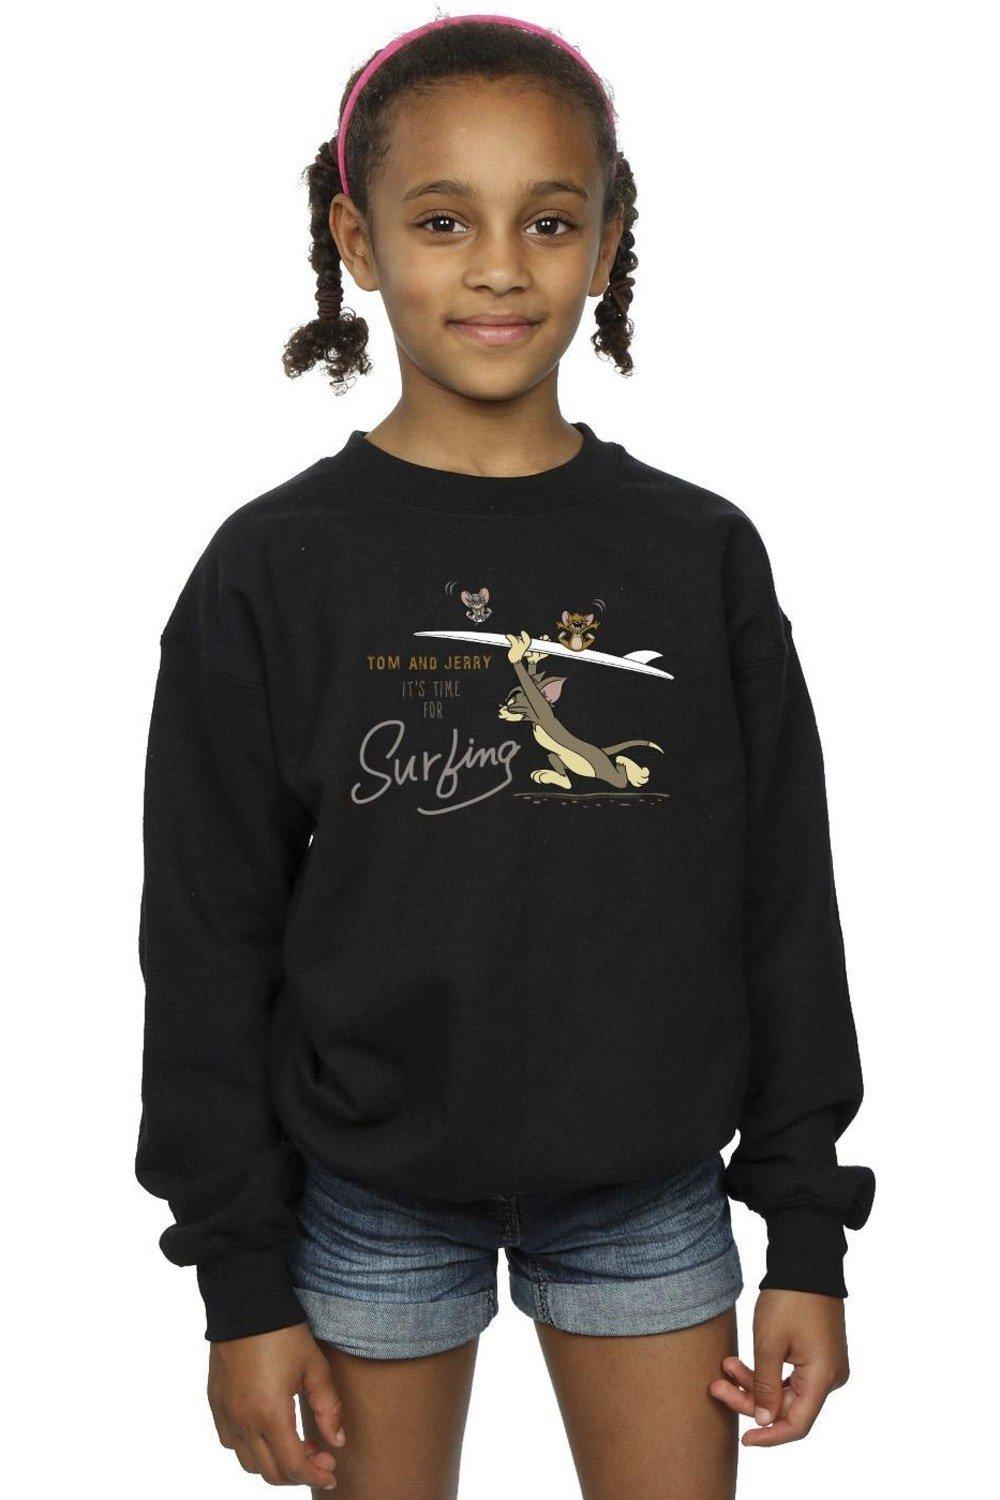 It’s Time For Surfing Sweatshirt